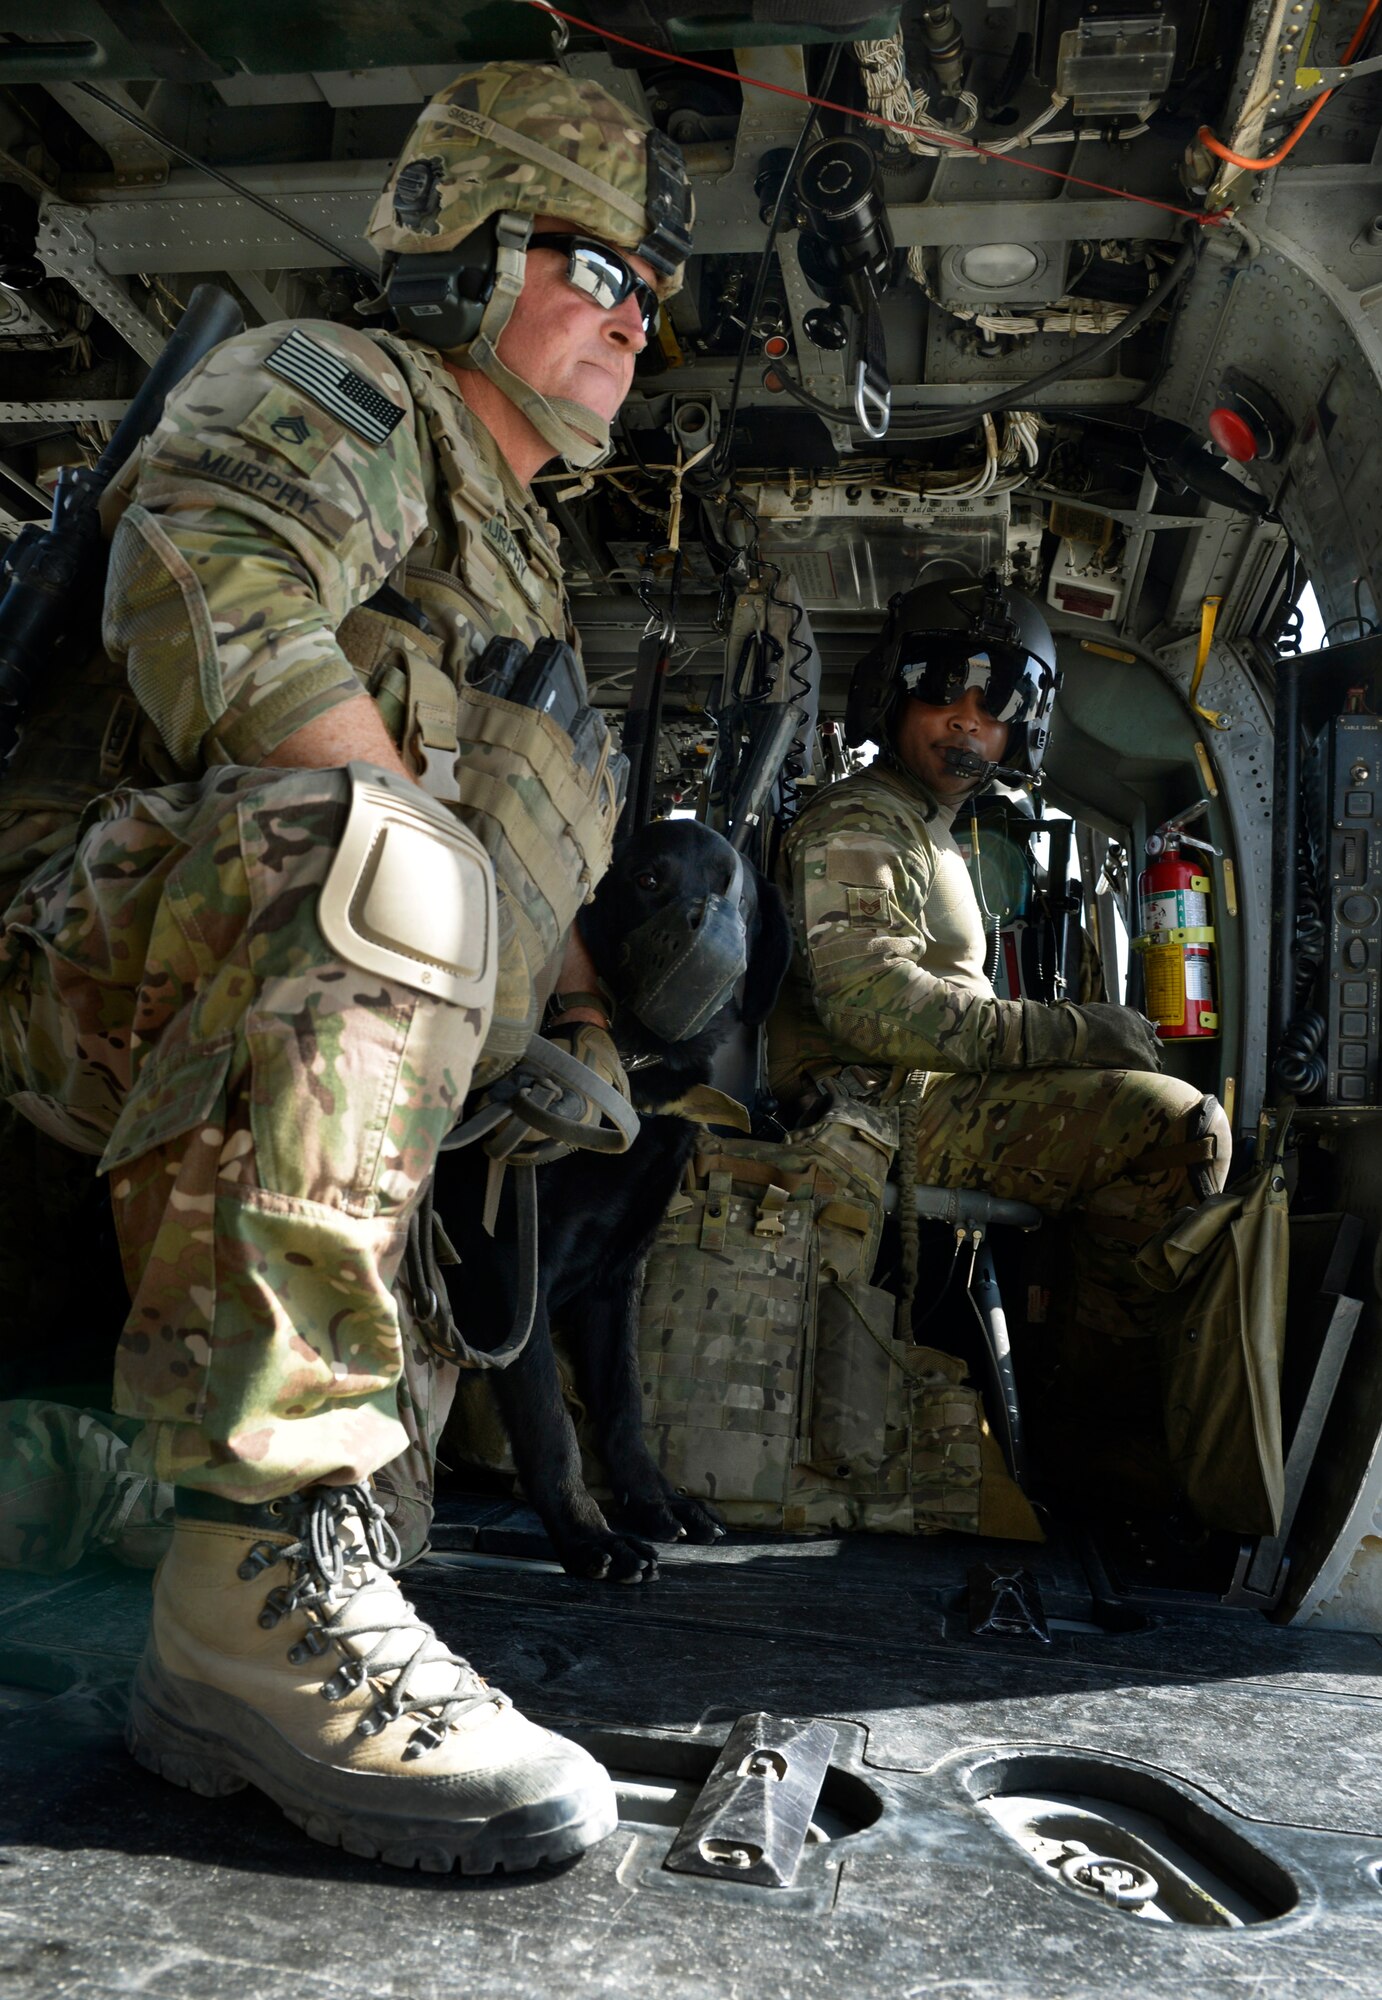 An Air Force pararescueman and Army tactical explosive detection dog handler escort a dog on and off a HH-60G Pave Hawk helicopter during training at Bagram Airfield, Afghanistan, June 21. Each dog and handler team took turns bringing the dogs near the helicopters to get them familiar with the sound prior to hoisting them. This is the first time both branches have participated in this kind of training here. (U.S. Air Force photo/ Staff Sgt. Stephenie Wade)
